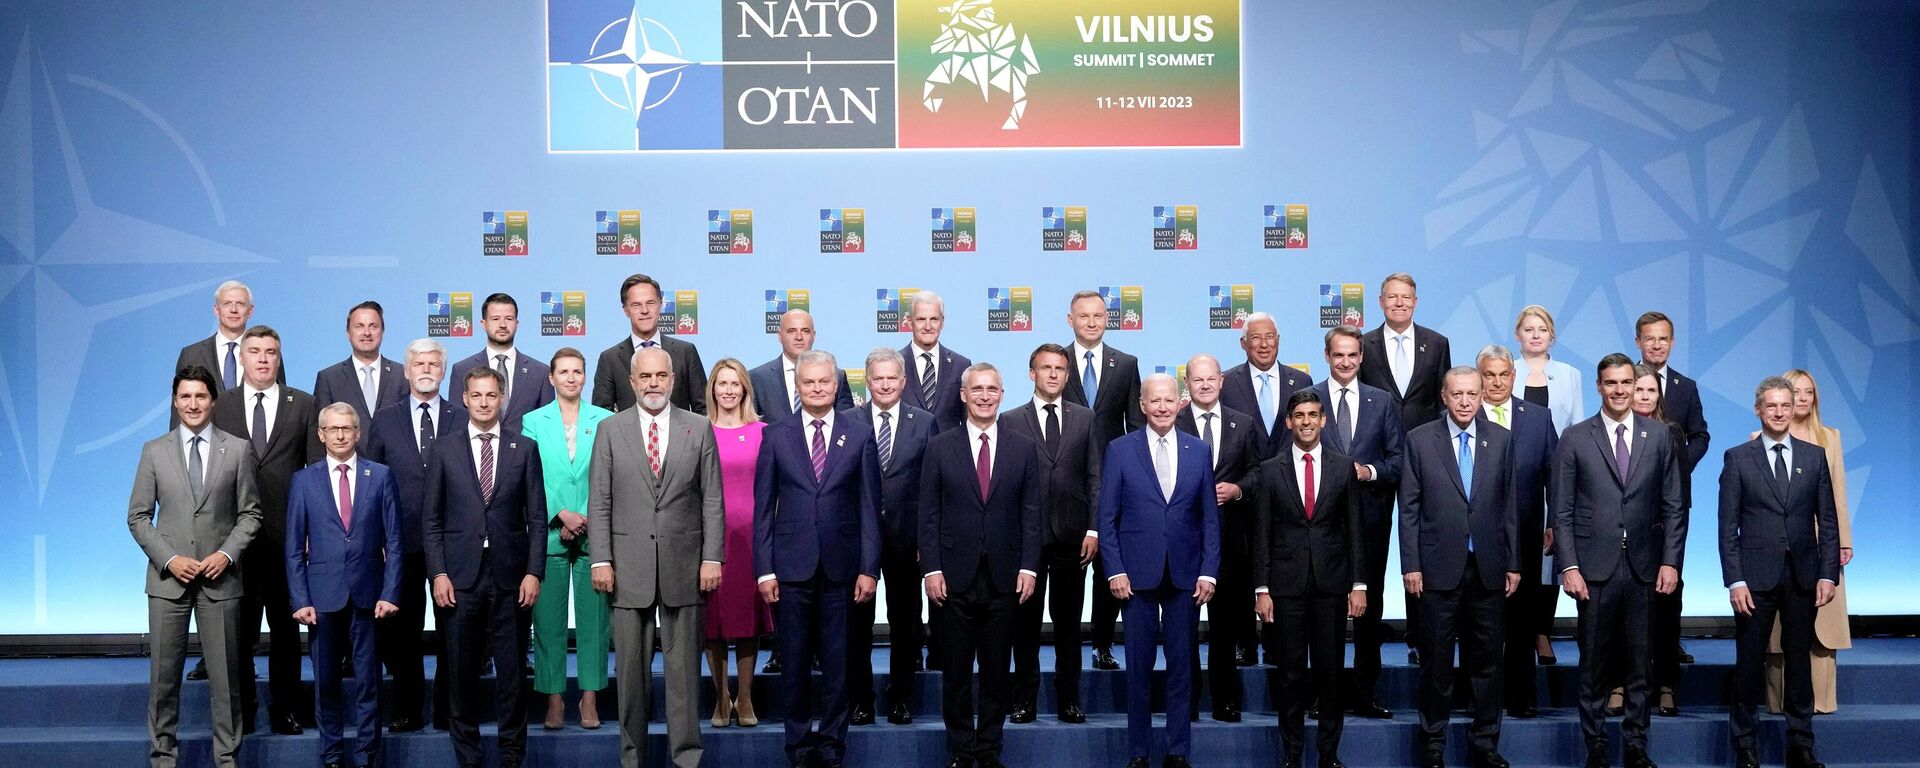 NATO heads of state and government pose during a group photo at a NATO summit in Vilnius, Lithuania, Tuesday, July 11, 2023. - Sputnik India, 1920, 12.07.2023